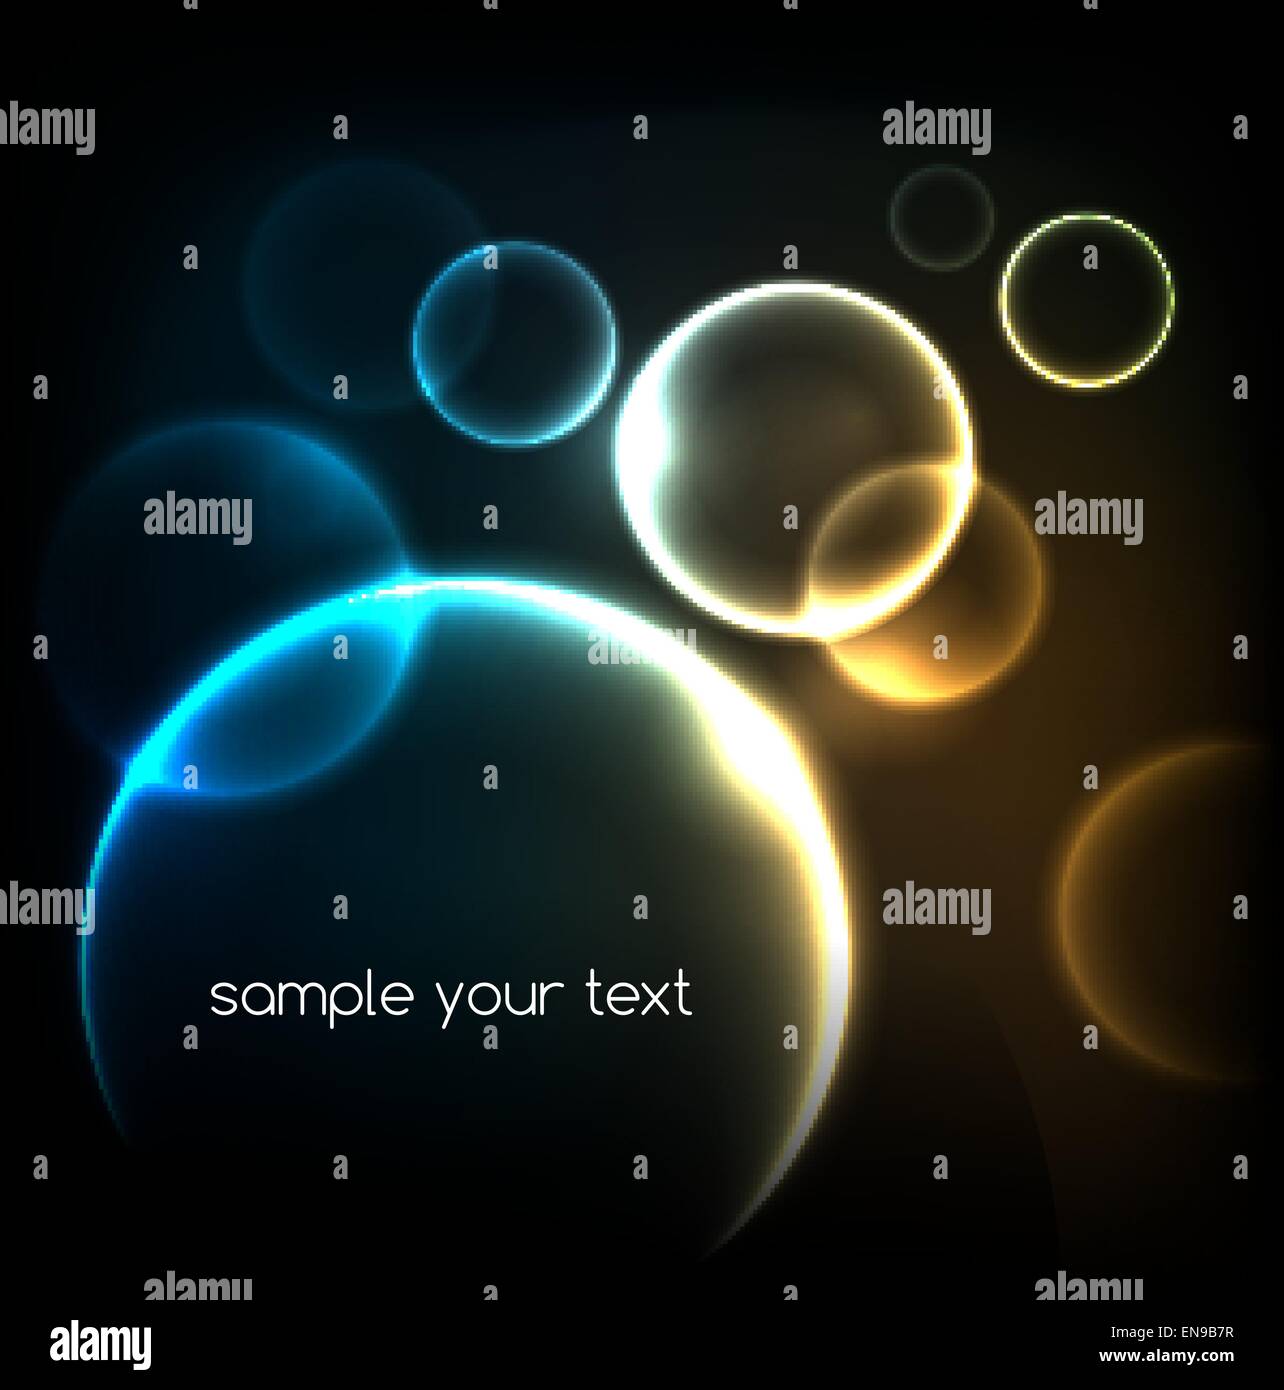 Blue light effects on round placeholder for your text on dark background. EPS10 Stock Vector